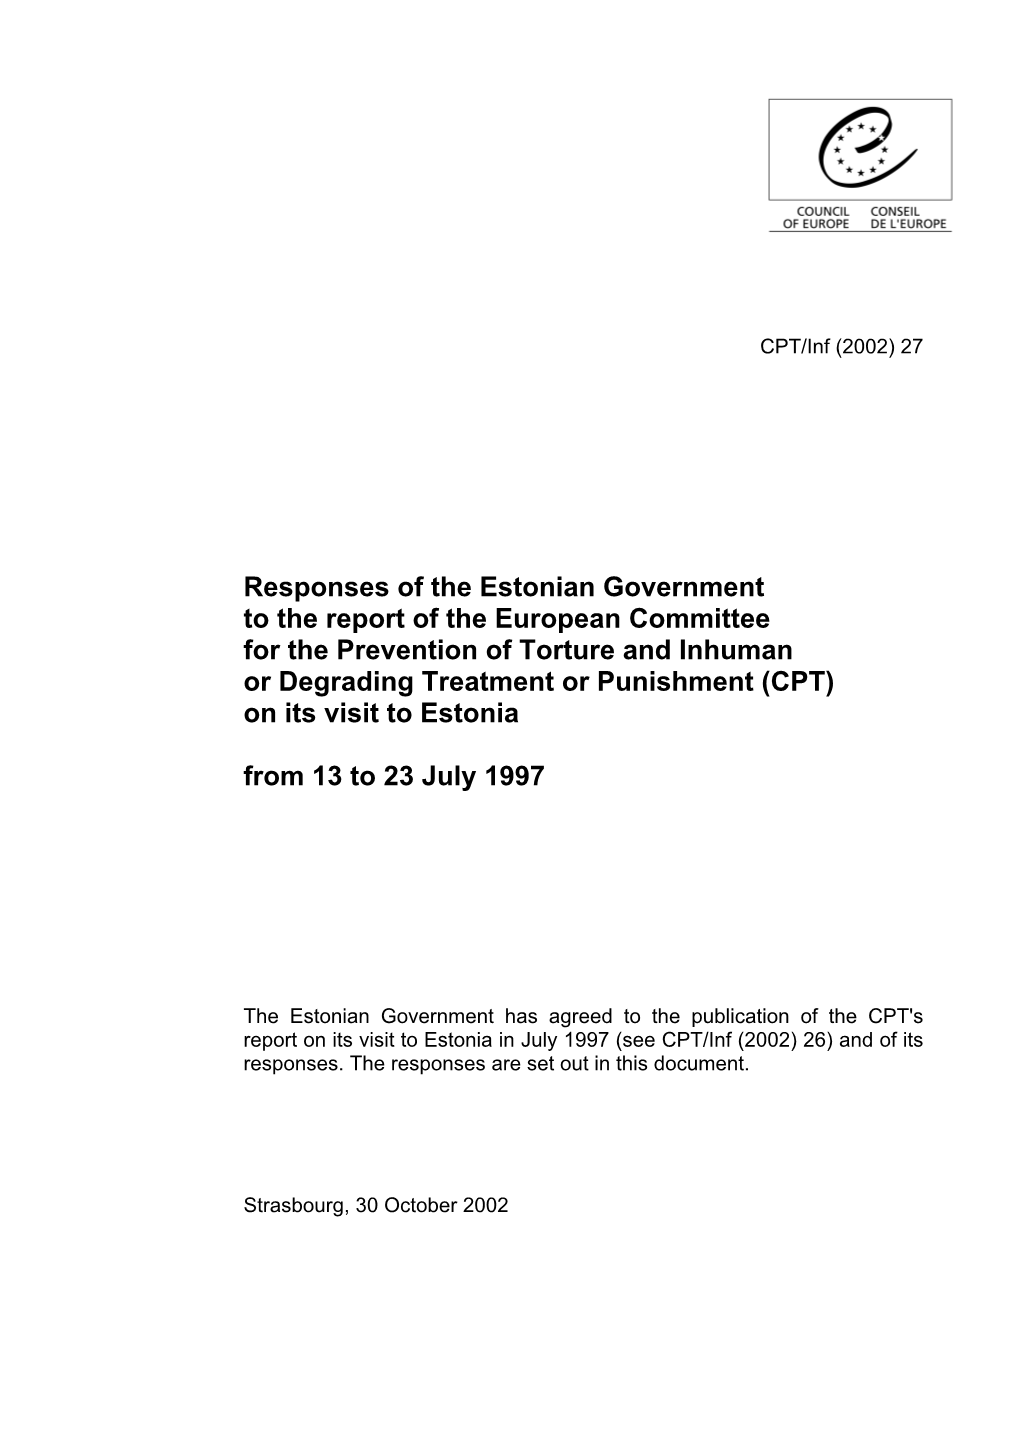 Responses of the Estonian Government to the Report of the European Committee for the Prevention of Torture and Inhuman Or Degrad